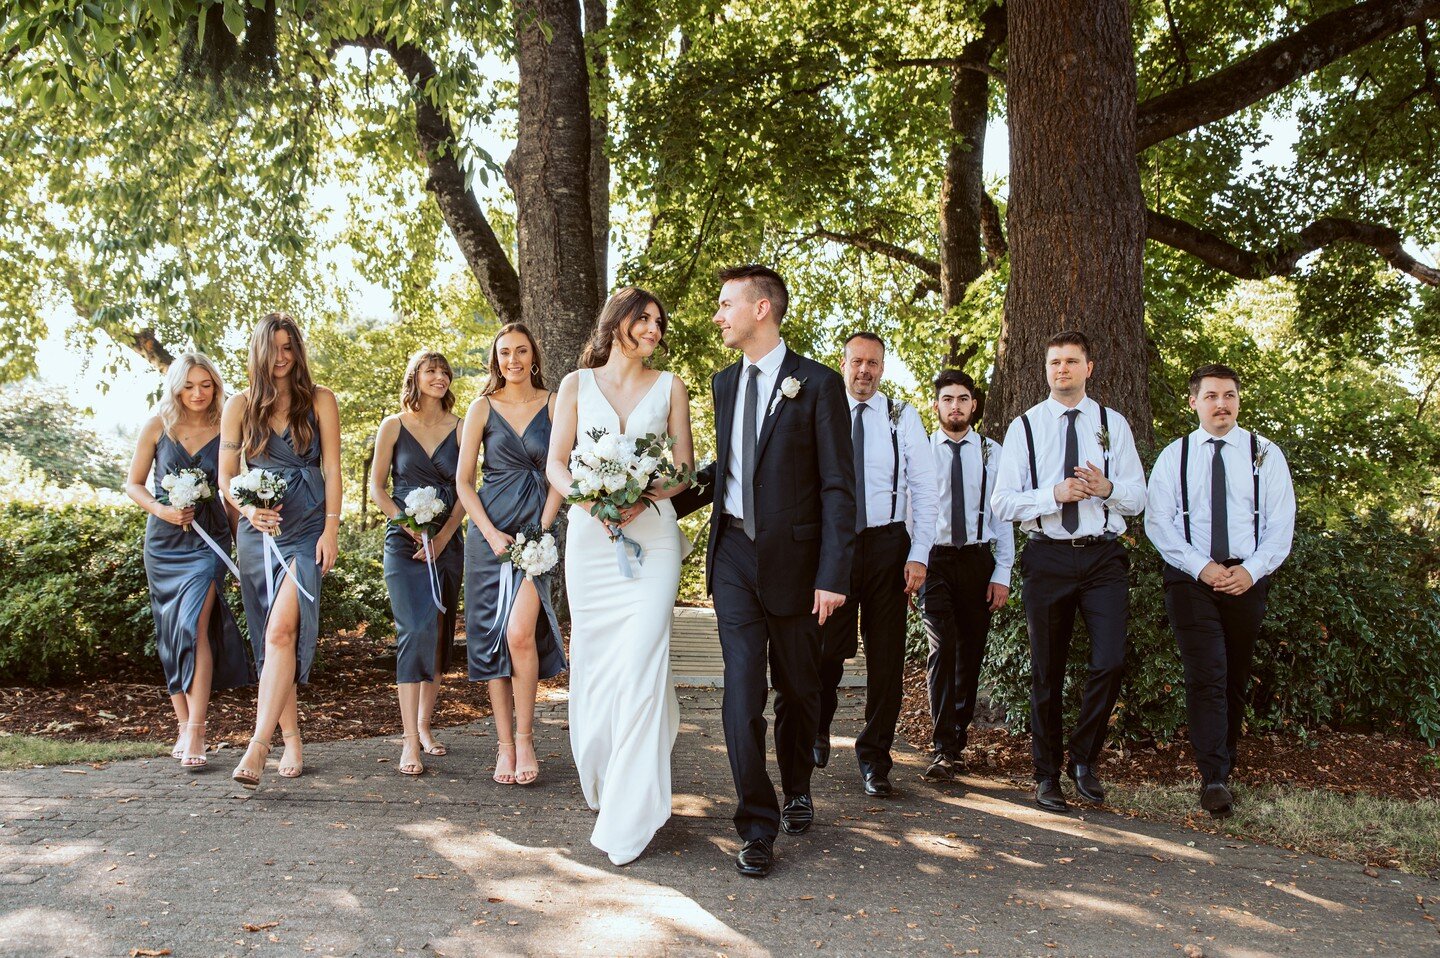 The people that make a big impact on your life and walk along side you in your ups and downs are those that will be the best wedding party.

I love to learn why people are included in a wedding party, they all mead so much to the bride and groom. 

T